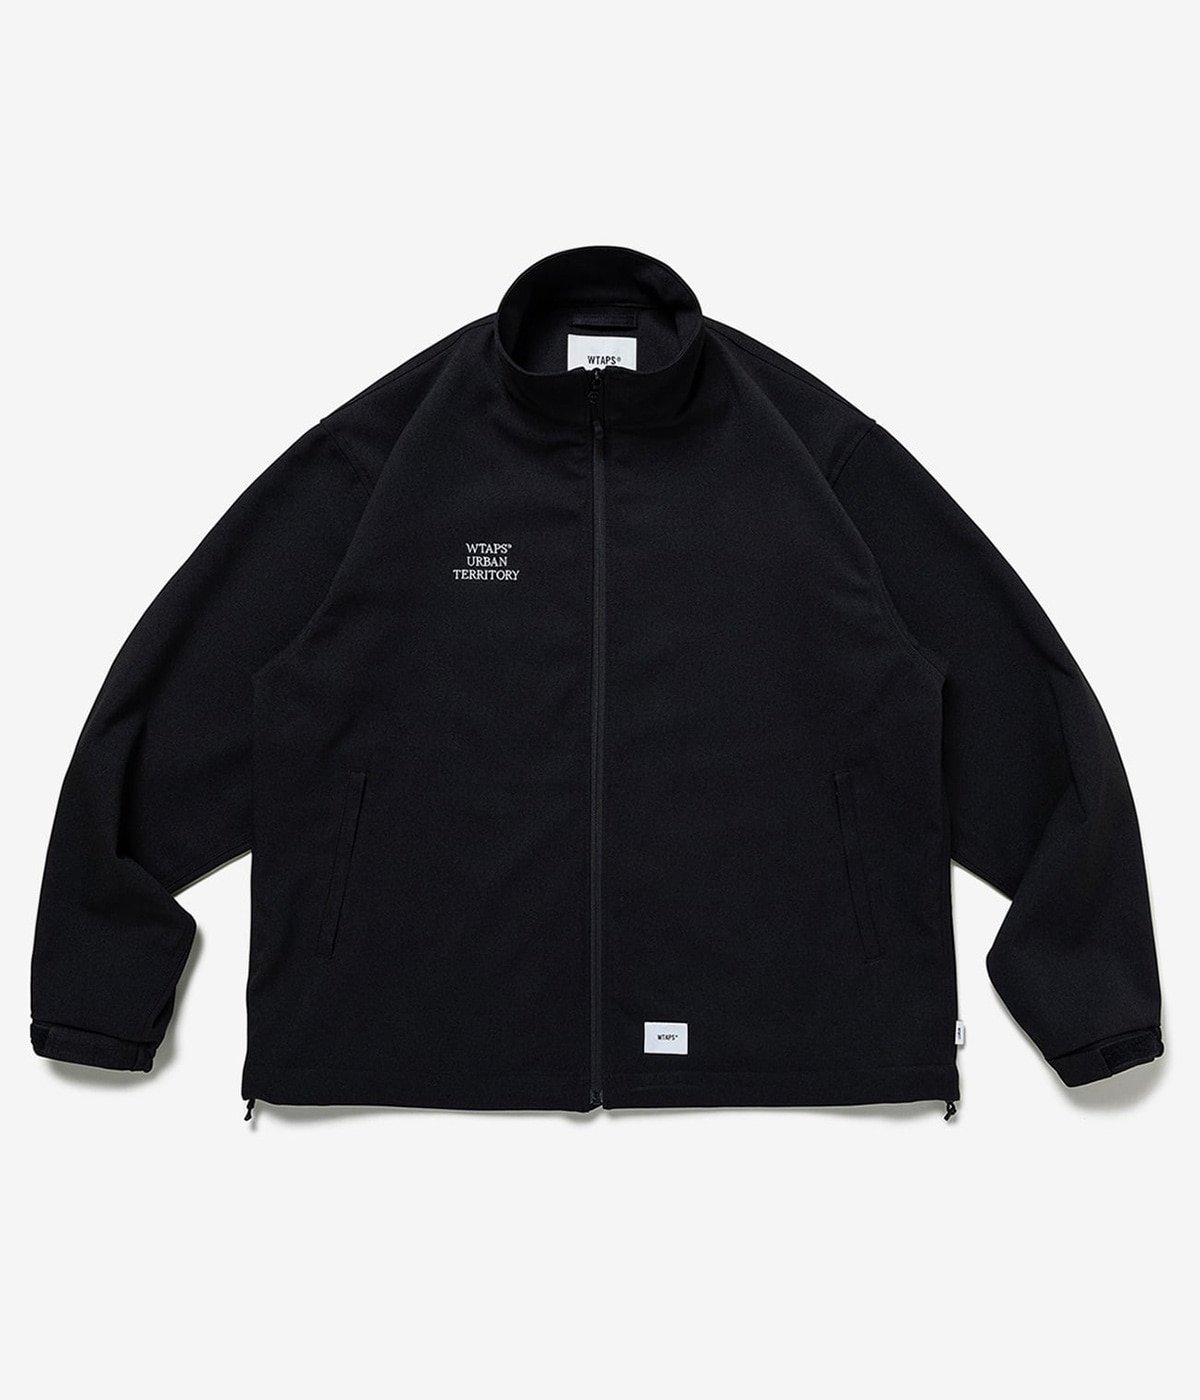 TRACK / JACKET / POLY. TWILL. WUT | WTAPS(ダブルタップス 